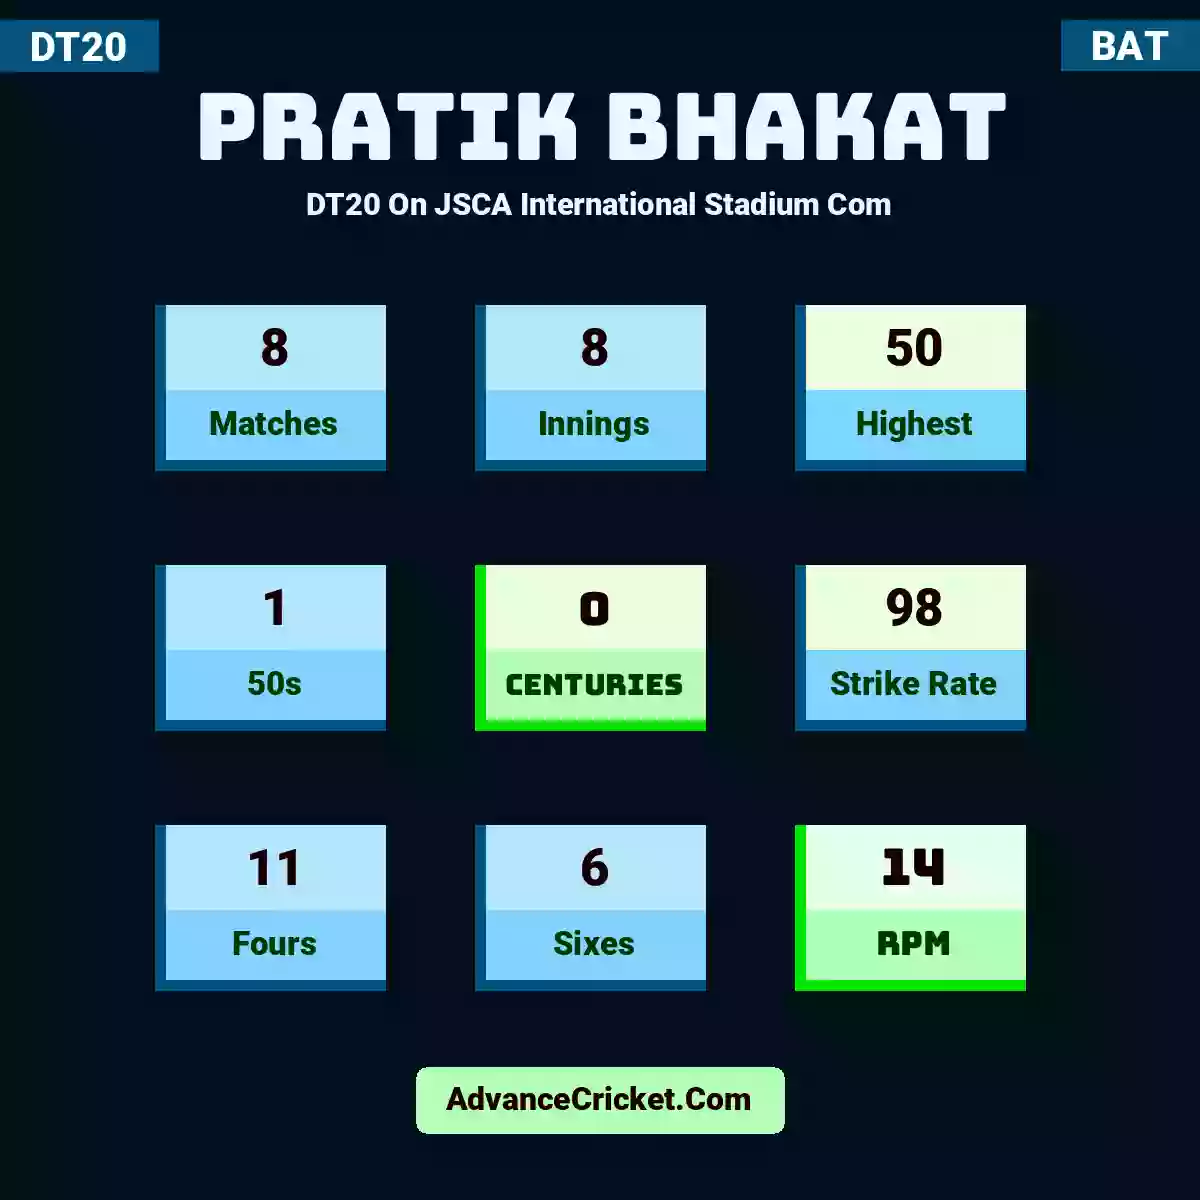 Pratik Bhakat DT20  On JSCA International Stadium Com, Pratik Bhakat played 8 matches, scored 50 runs as highest, 1 half-centuries, and 0 centuries, with a strike rate of 98. P.Bhakat hit 11 fours and 6 sixes, with an RPM of 14.